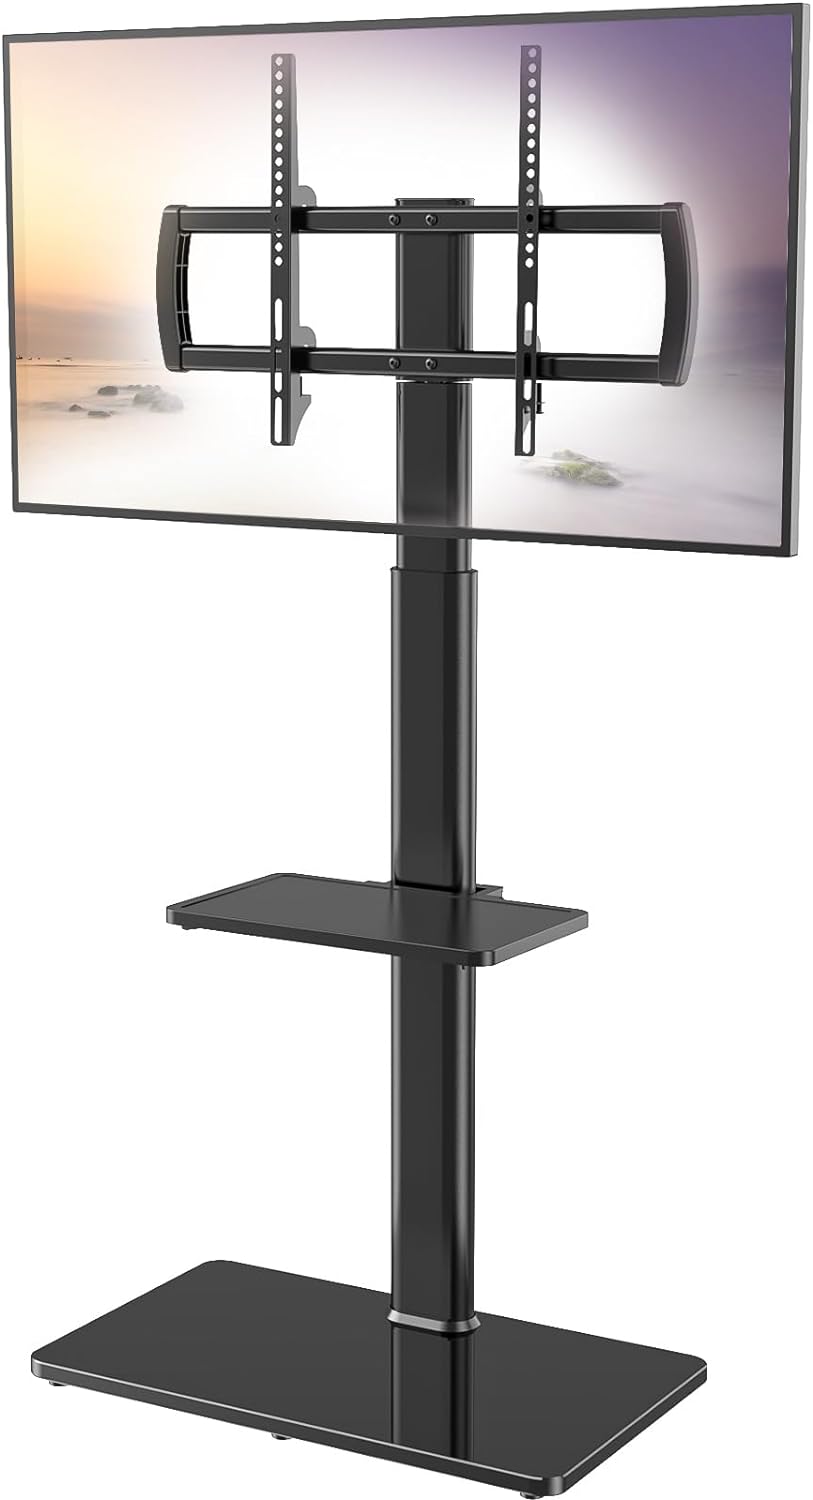 Universal Floor TV Stand with Mount 80 Degree Swivel Height Adjustable and Space Saving Design for Most 27 to 65 inch LCD, LED OLED TVs, 2 Shelves Perfect for Corner & Bedroom HT2002B